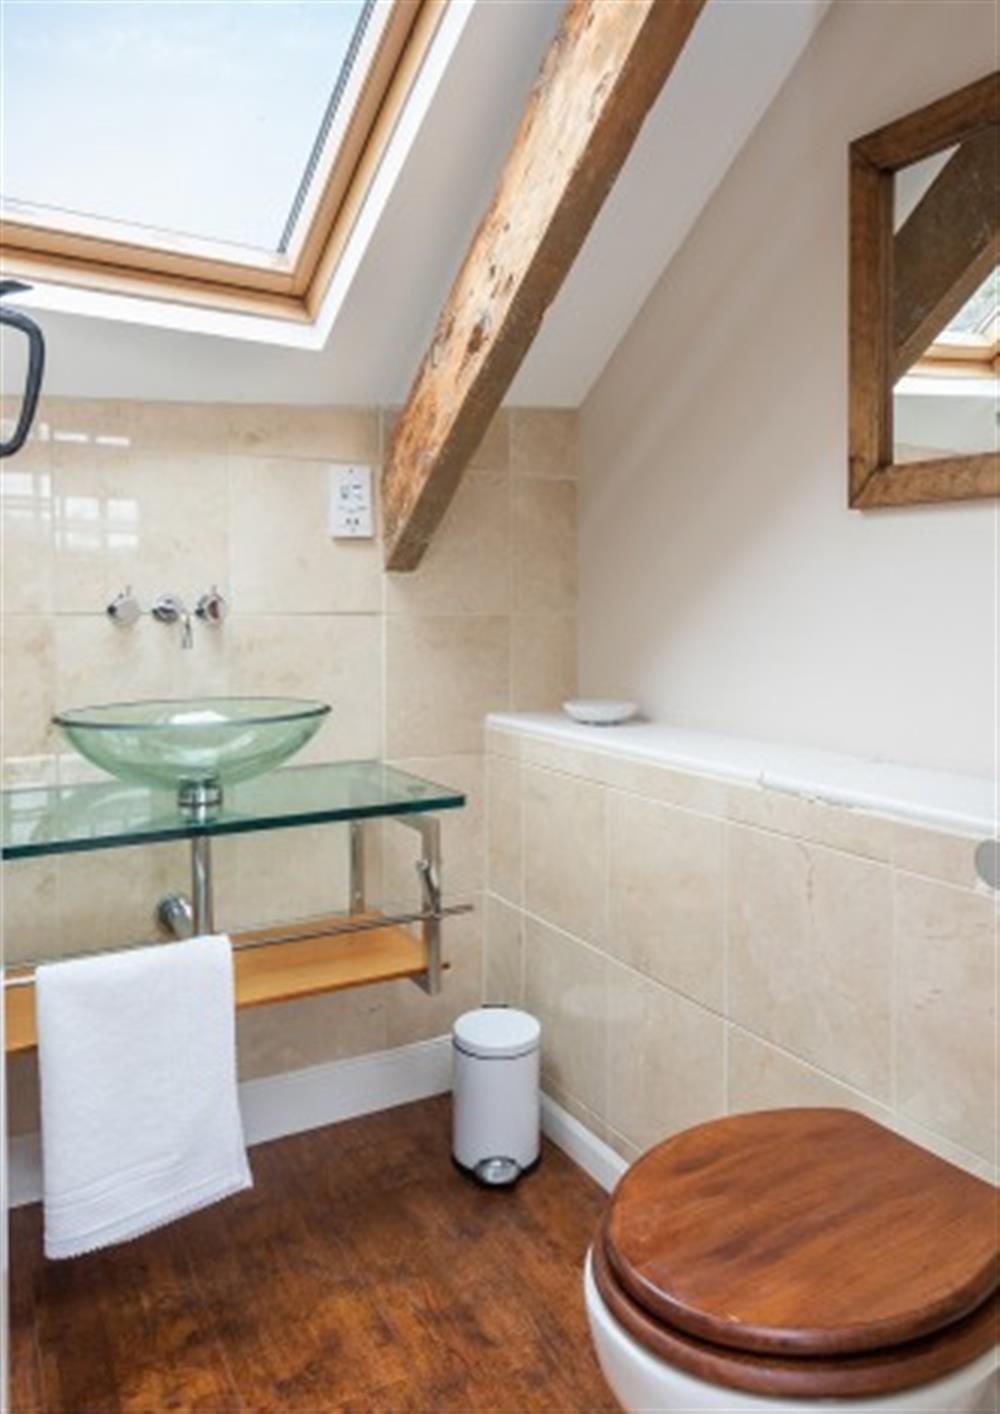 Top floor shower room at The Mariner's Cottage in Salcombe